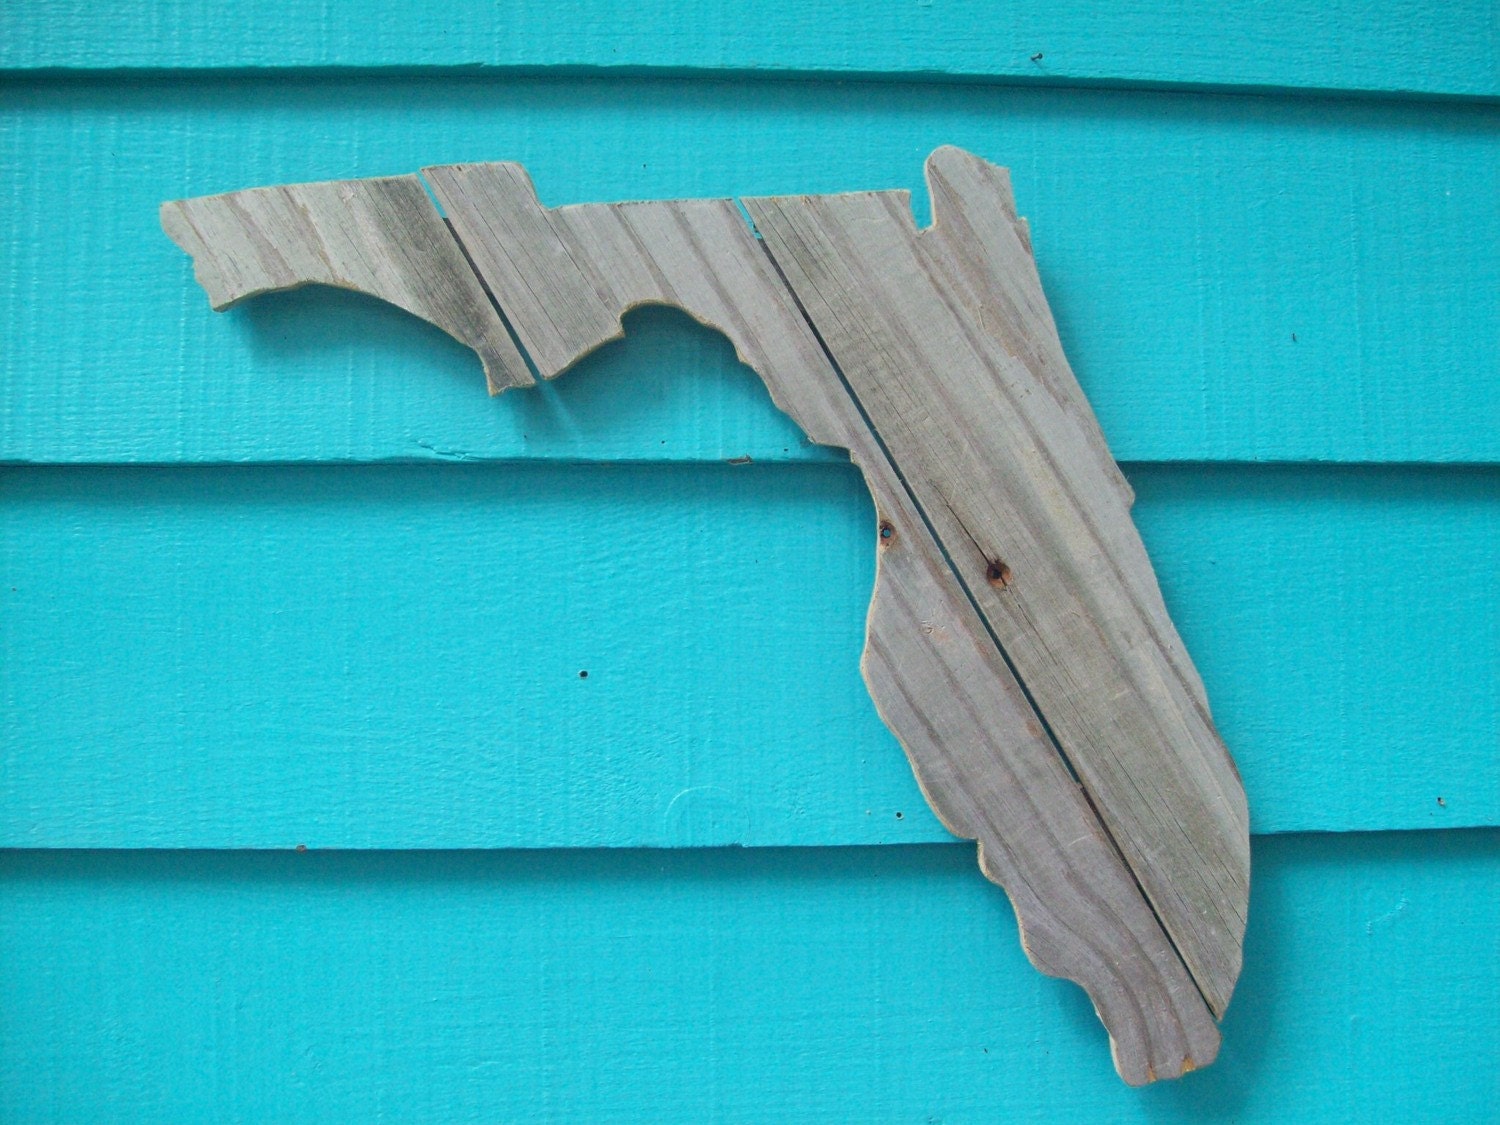 Florida (or any state) made of recycled fence wood